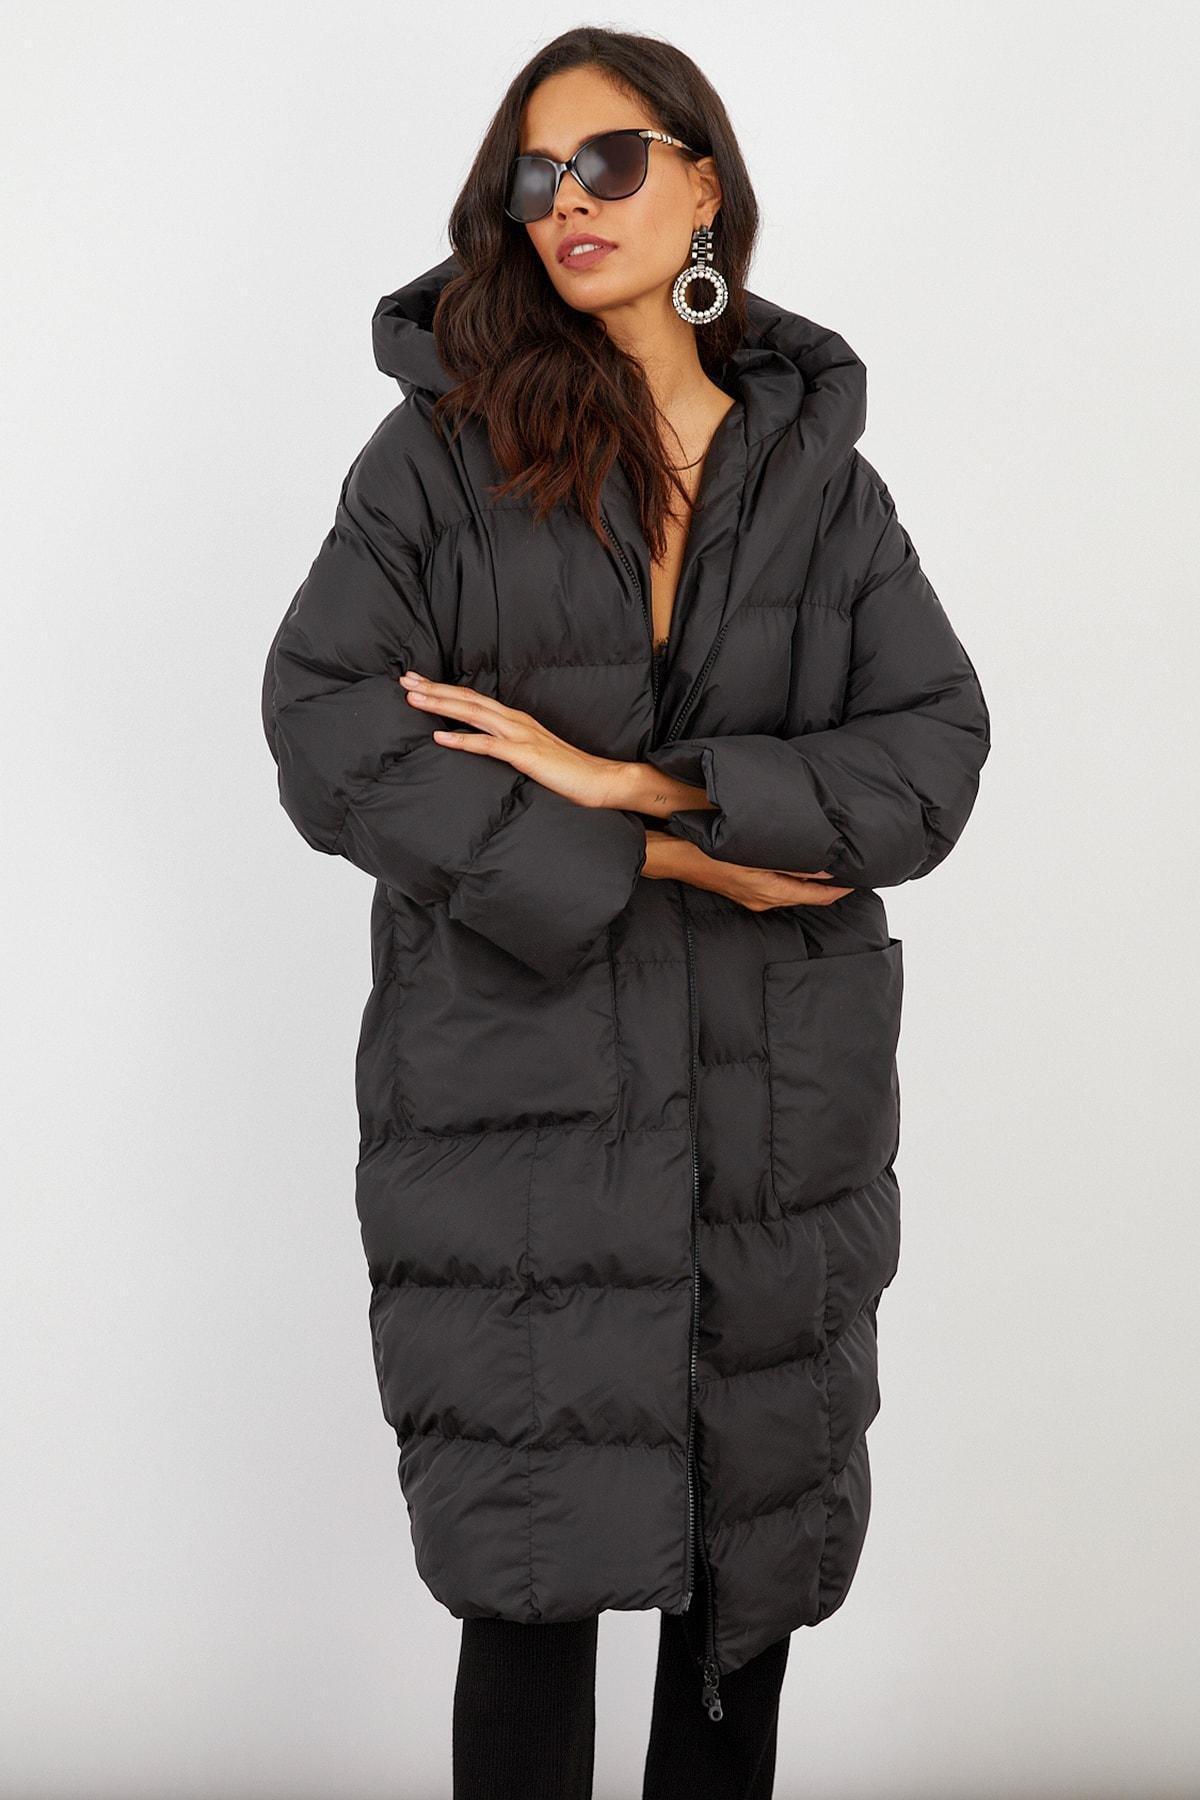 Cool & Sexy - Black Hooded Puffer Jacket